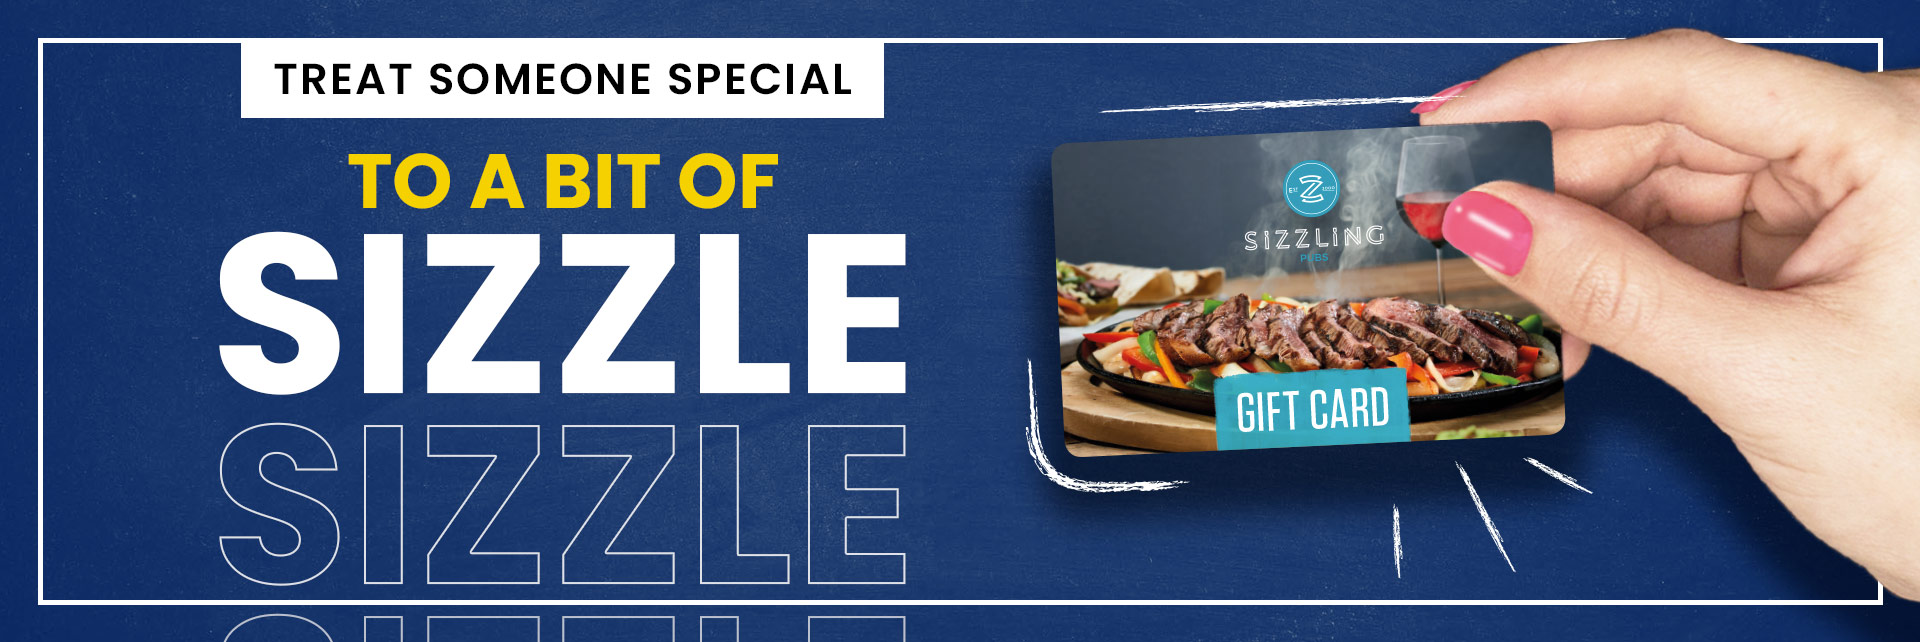 Sizzling Pubs Gift Card at The Grapes in Liverpool